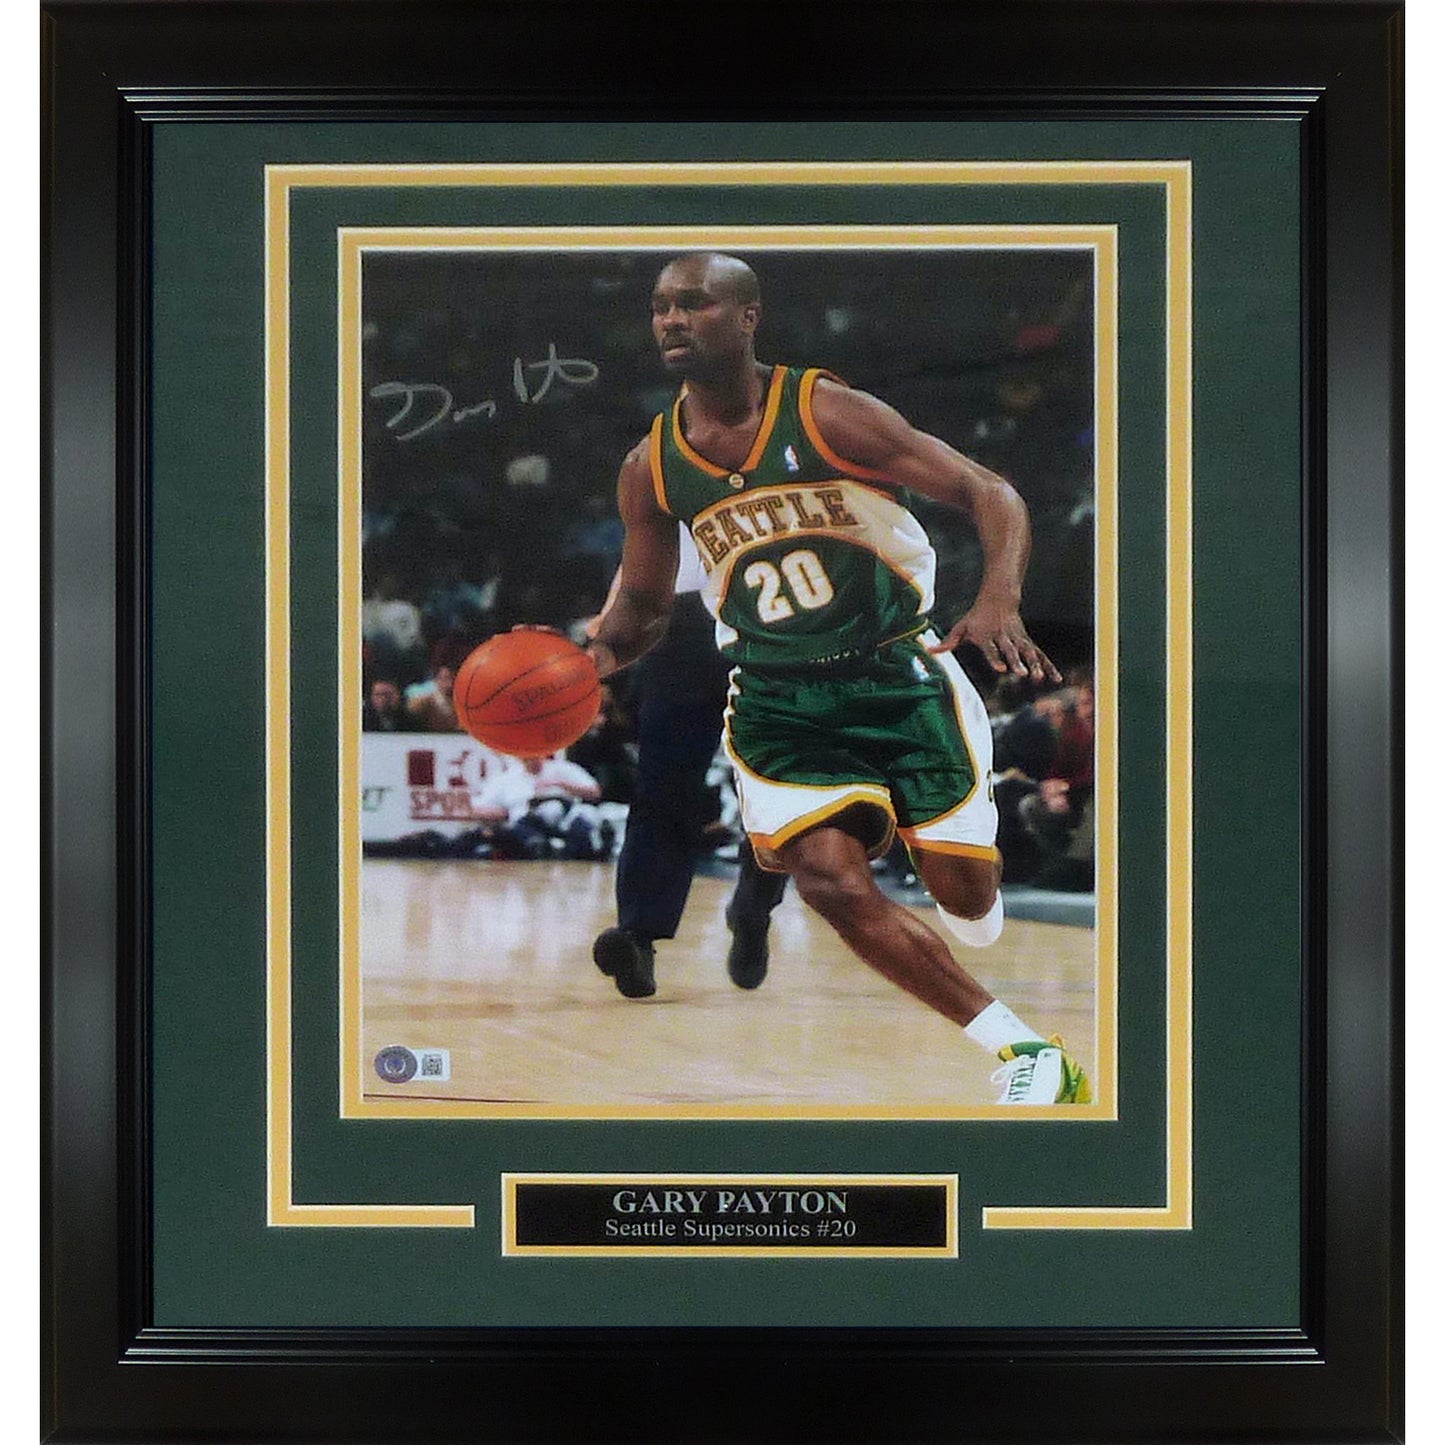 Gary Payton Autographed Seattle SuperSonics Deluxe Framed 11x14 Photo - Beckett